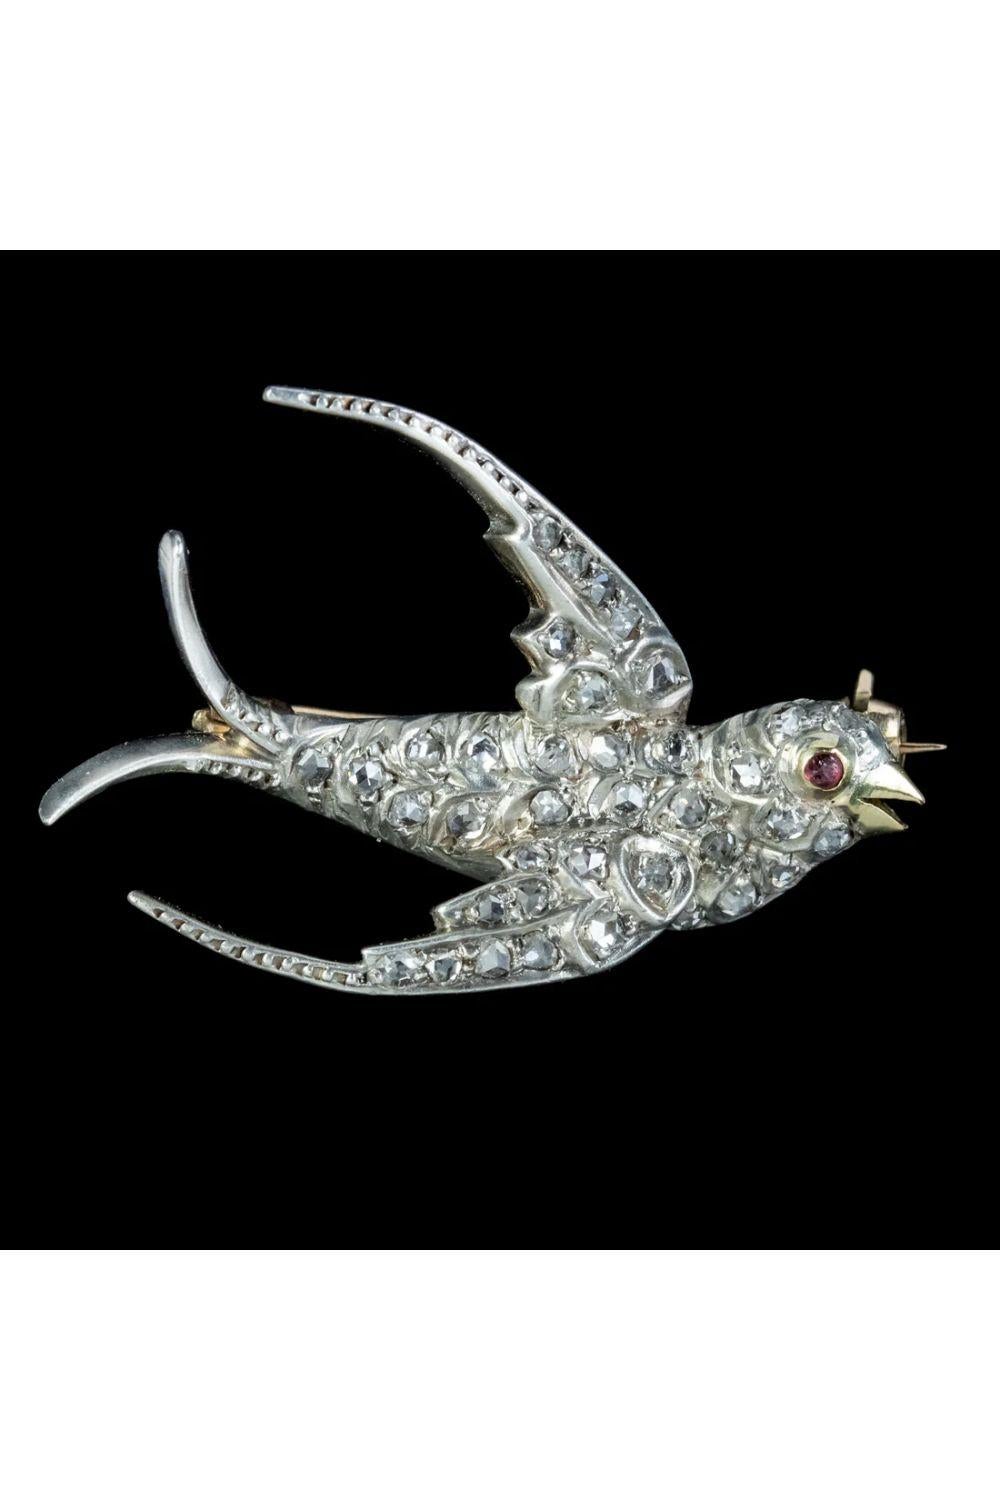 A pretty antique Victorian swallow brooch from the late 19th Century decorated with glistening rose cut diamonds and a red paste eye.

The image of a swallow was popular during the Victorian era and was often gifted as a romantic token as the birds